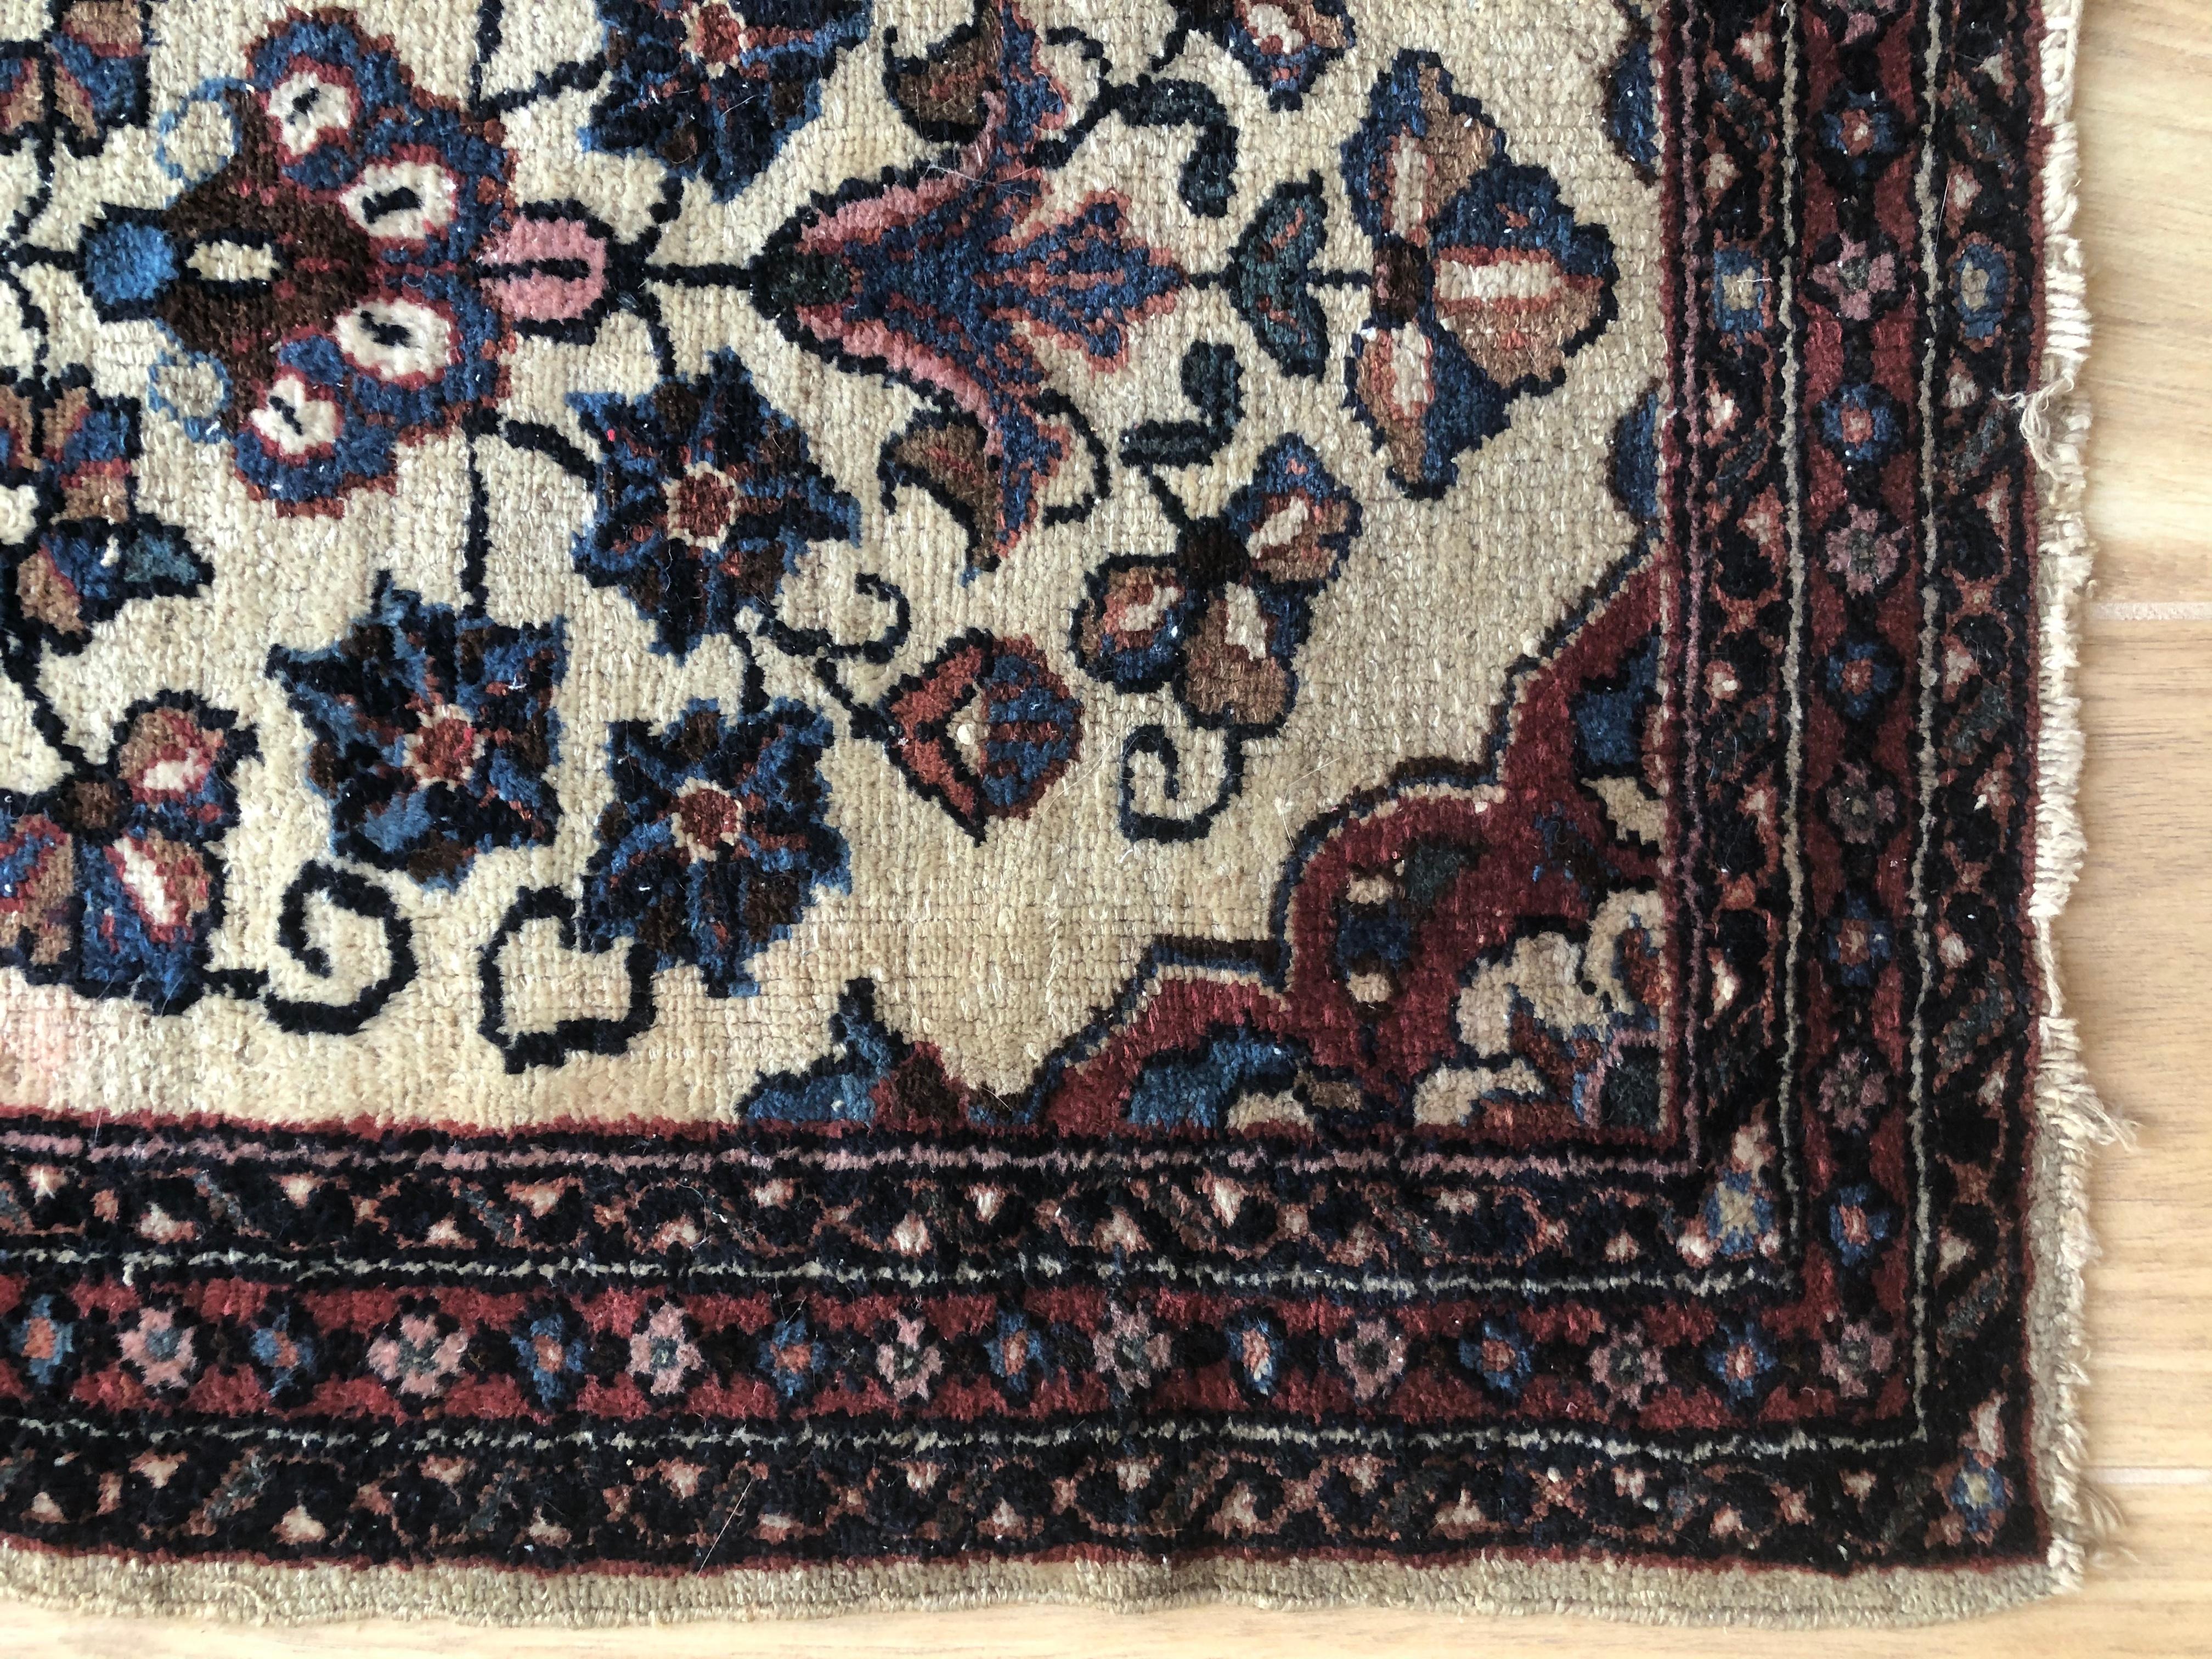 Handwoven one of a kind 19th century floral Persian rug. Beautiful tones of cream and beige with layers of pinks, blue and red. Perfect as an accent rug in living room or bedroom. Bringing a soothing pop of color into any space.